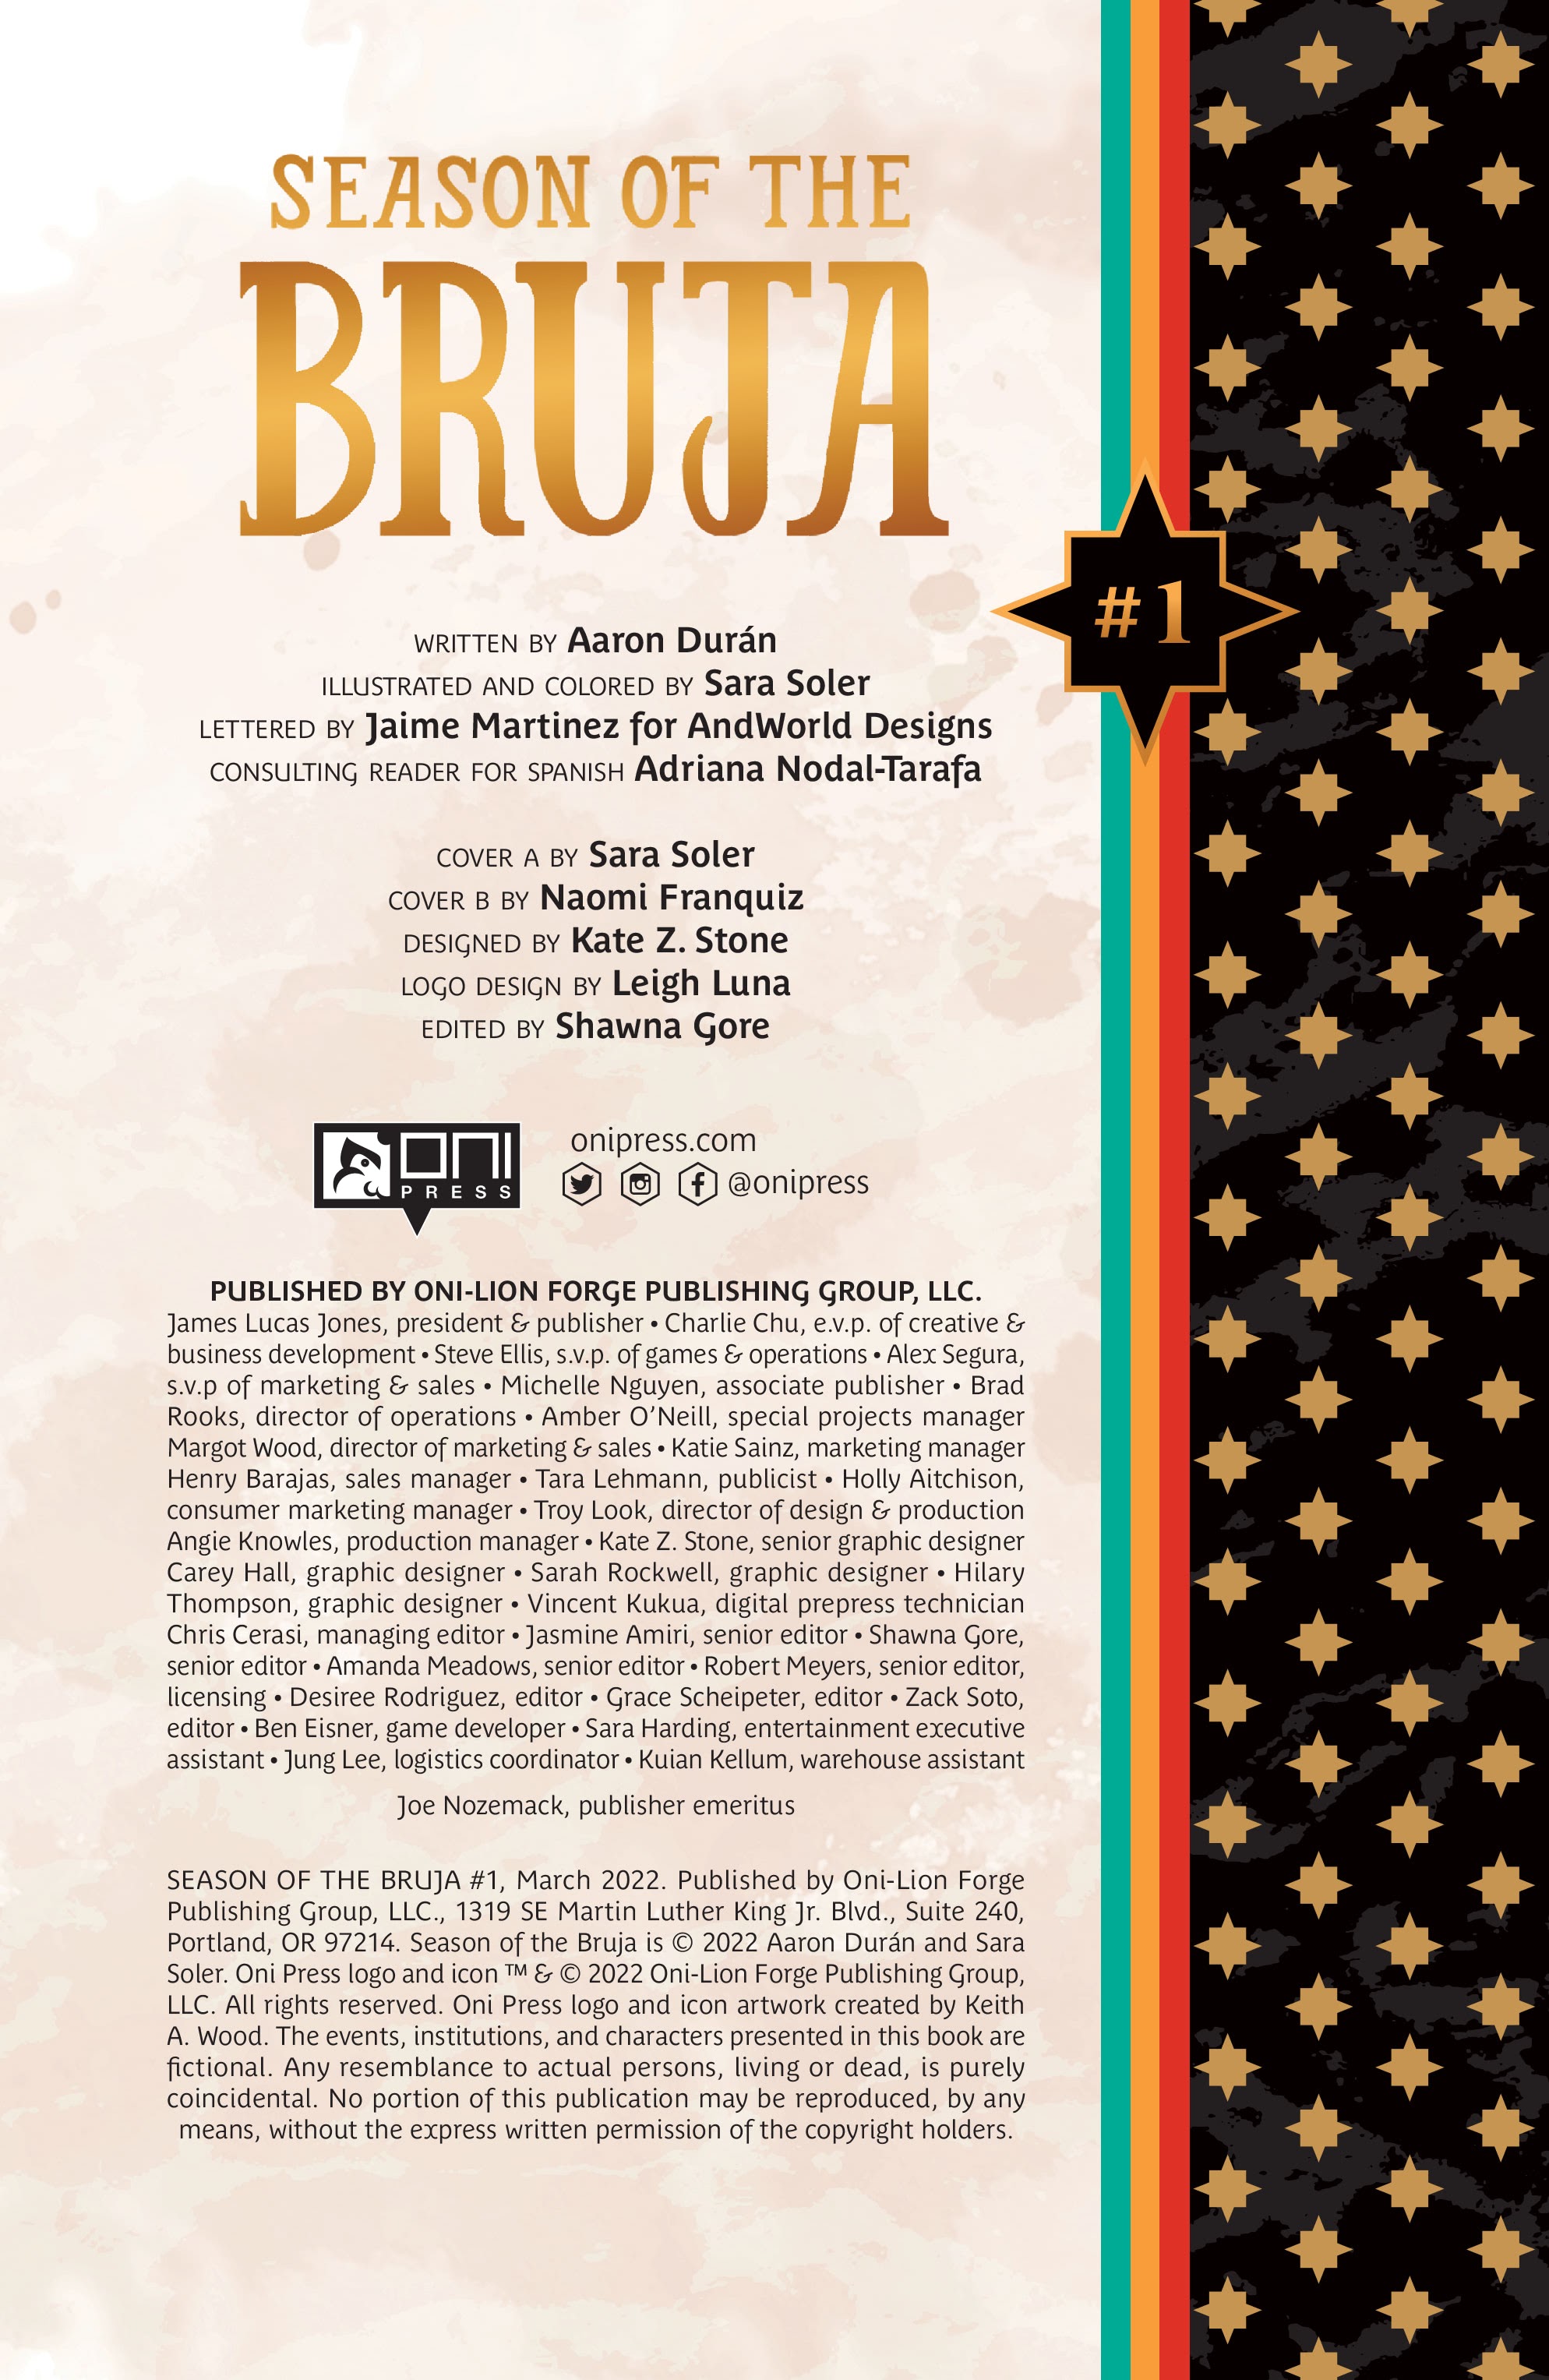 Read online Season of the Bruja comic -  Issue #1 - 2